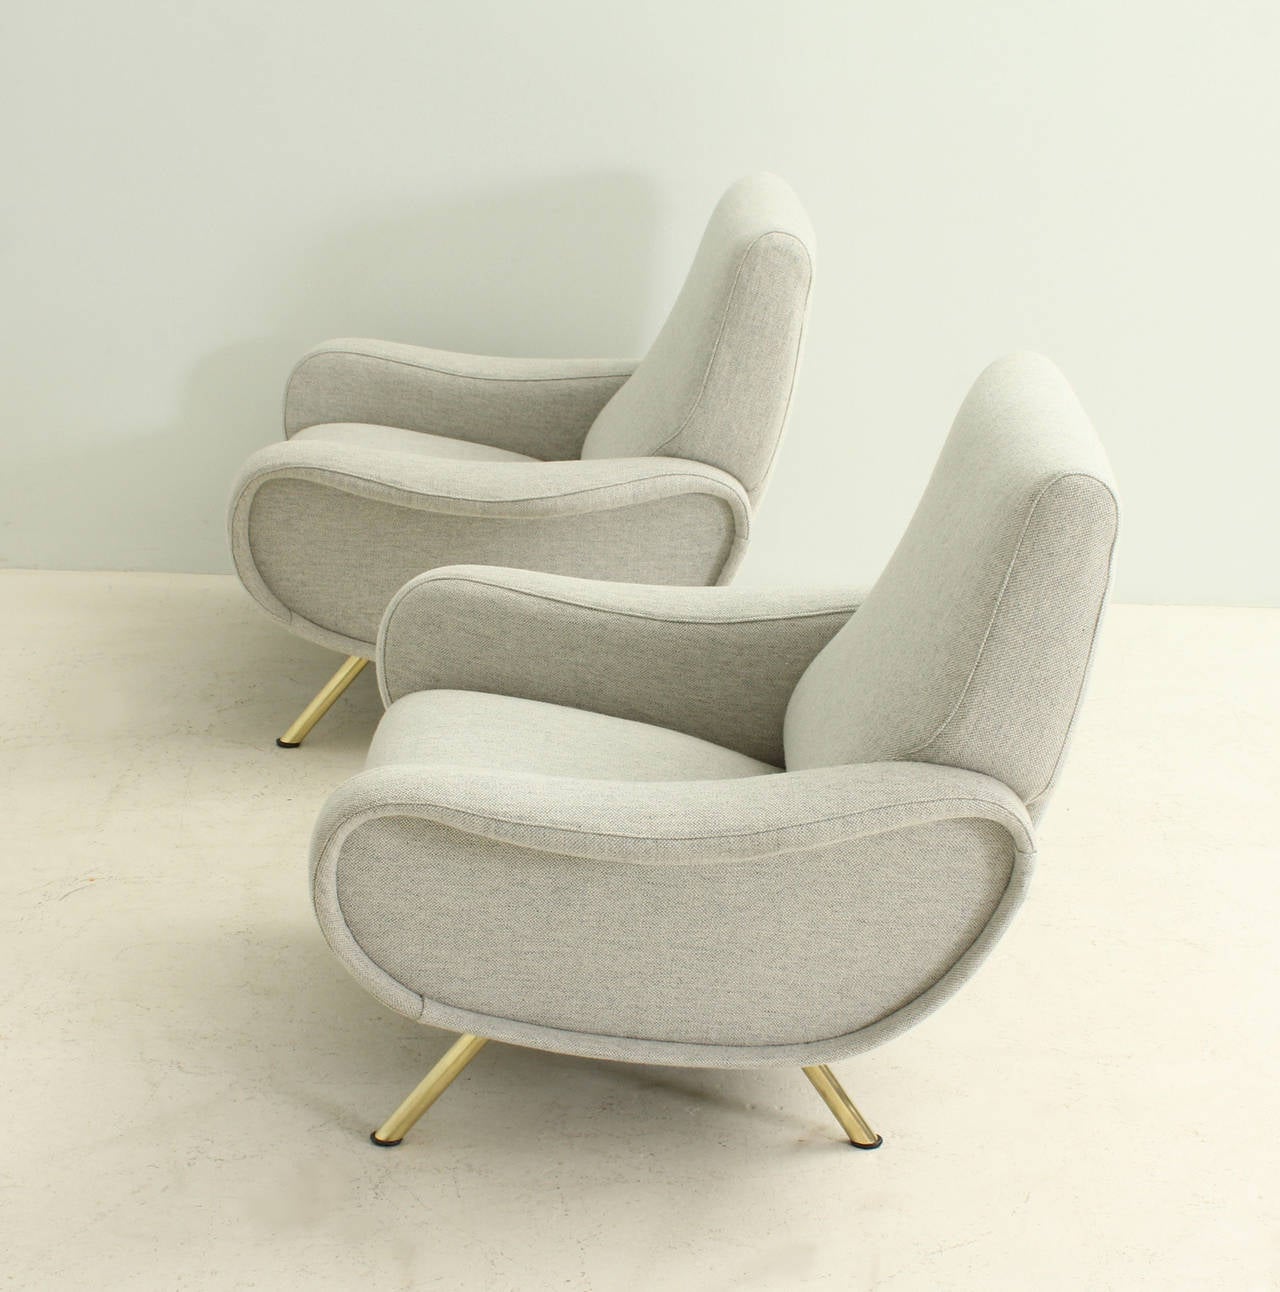 Pair of Lady armchairs designed by Marco Zanuso in 1951 for Arflex, Italy.  Early edition reupholstered with Hallingdal wool fabric.